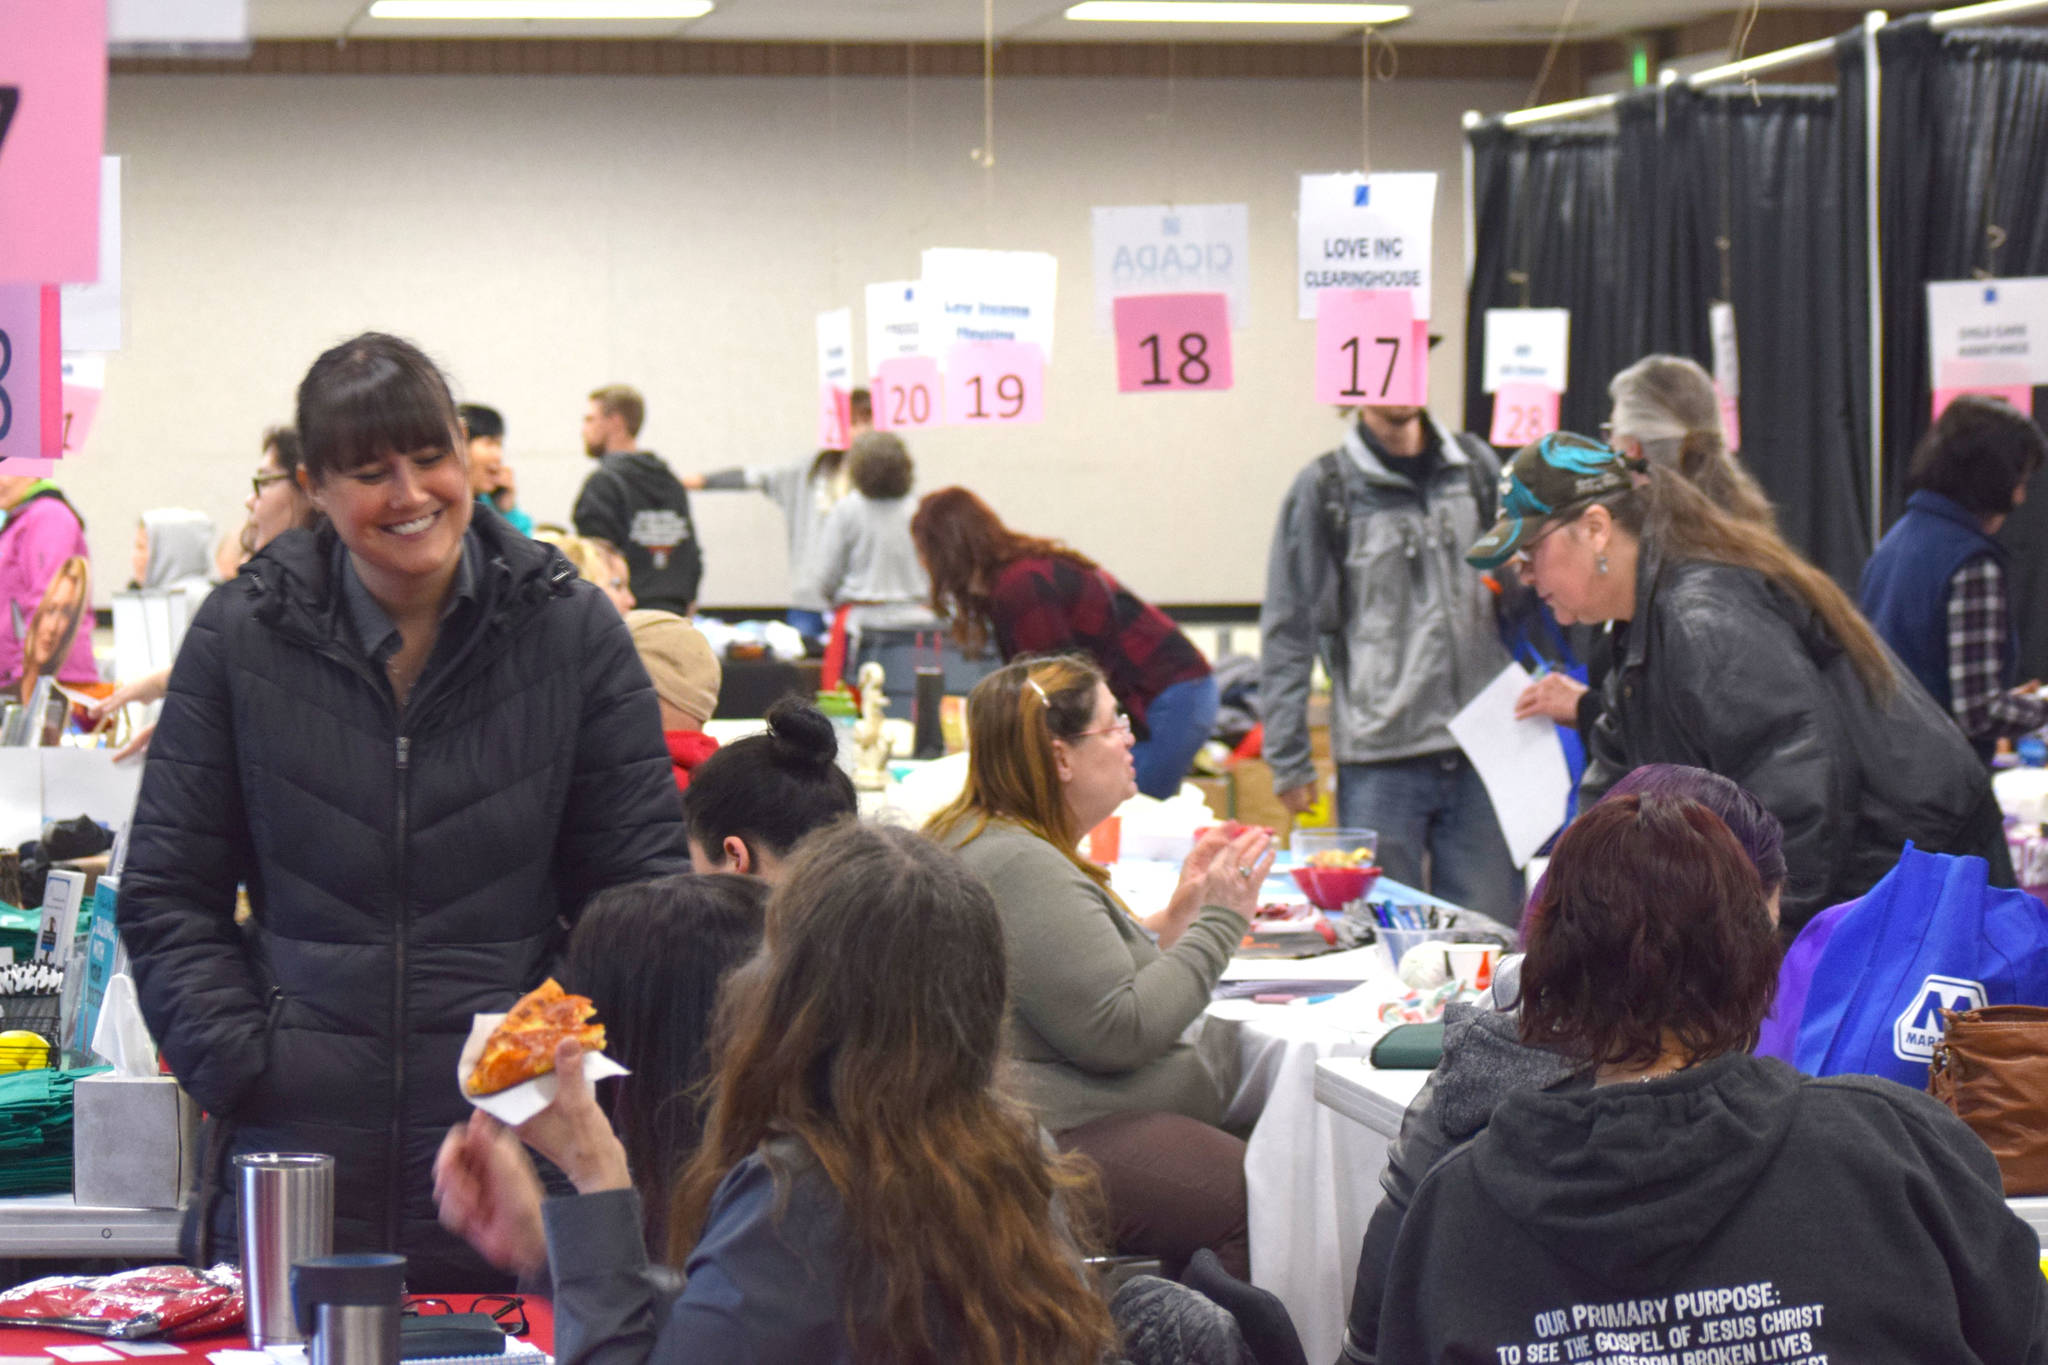 Project Homeless Connect organizers provide services on Jan. 23, 2019, in Soldotna, Alaska, during the annual outreach event. (Photo by Brian Mazurek/Clarion file)